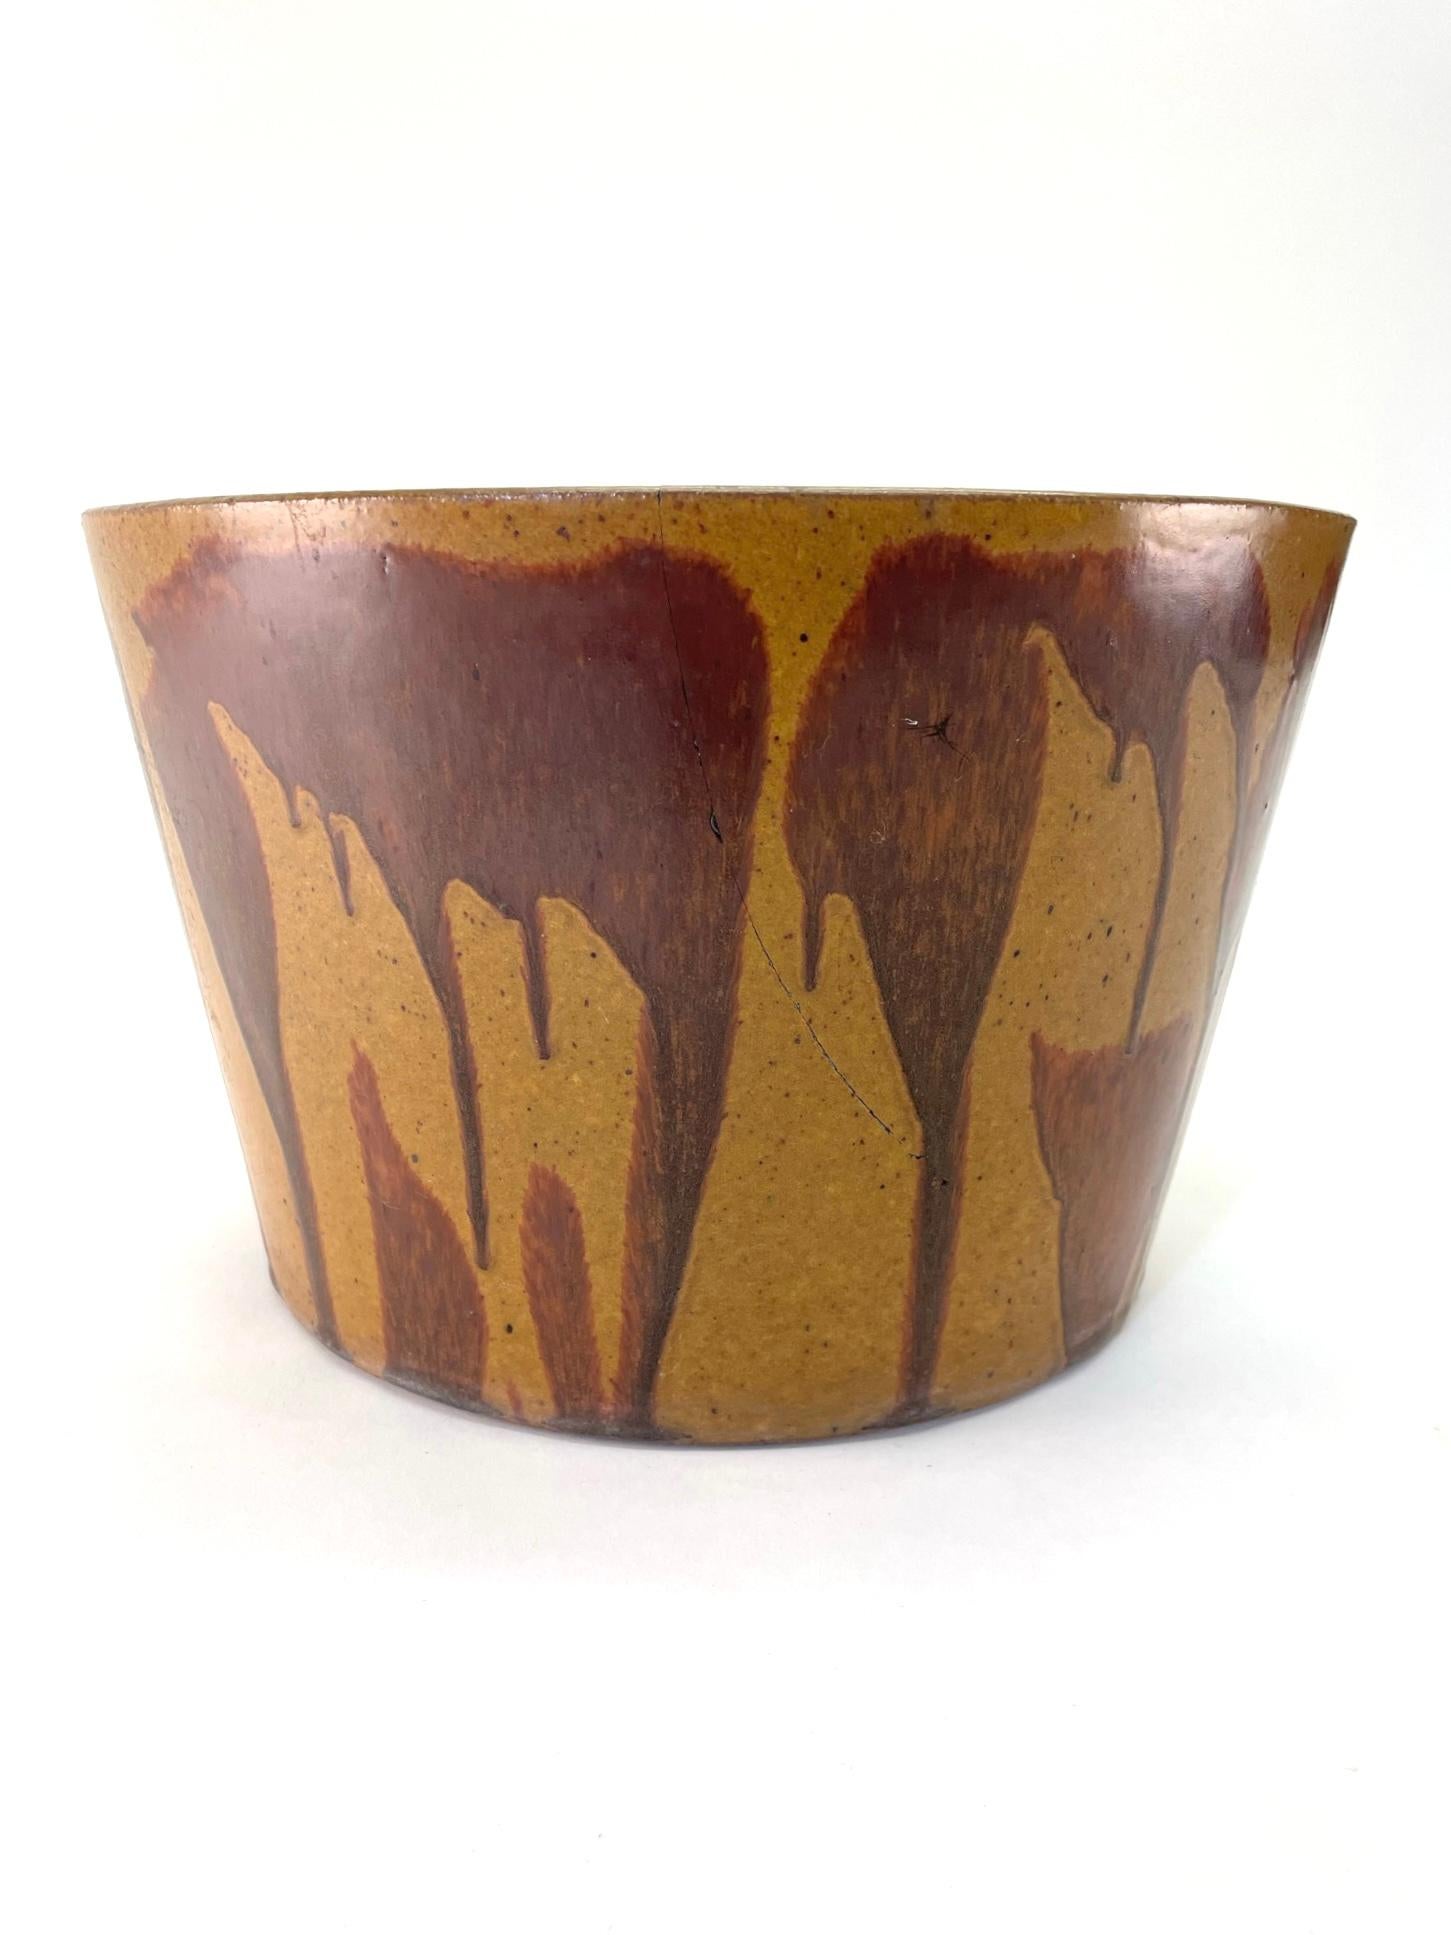 Rare David Cressey Planter, model S-12 from Architectural Pottery USA, c. 1968. Flame-glazed stoneware. Overall in very good condition. Does have a minor hairline fracture on one side. Please see photo. 